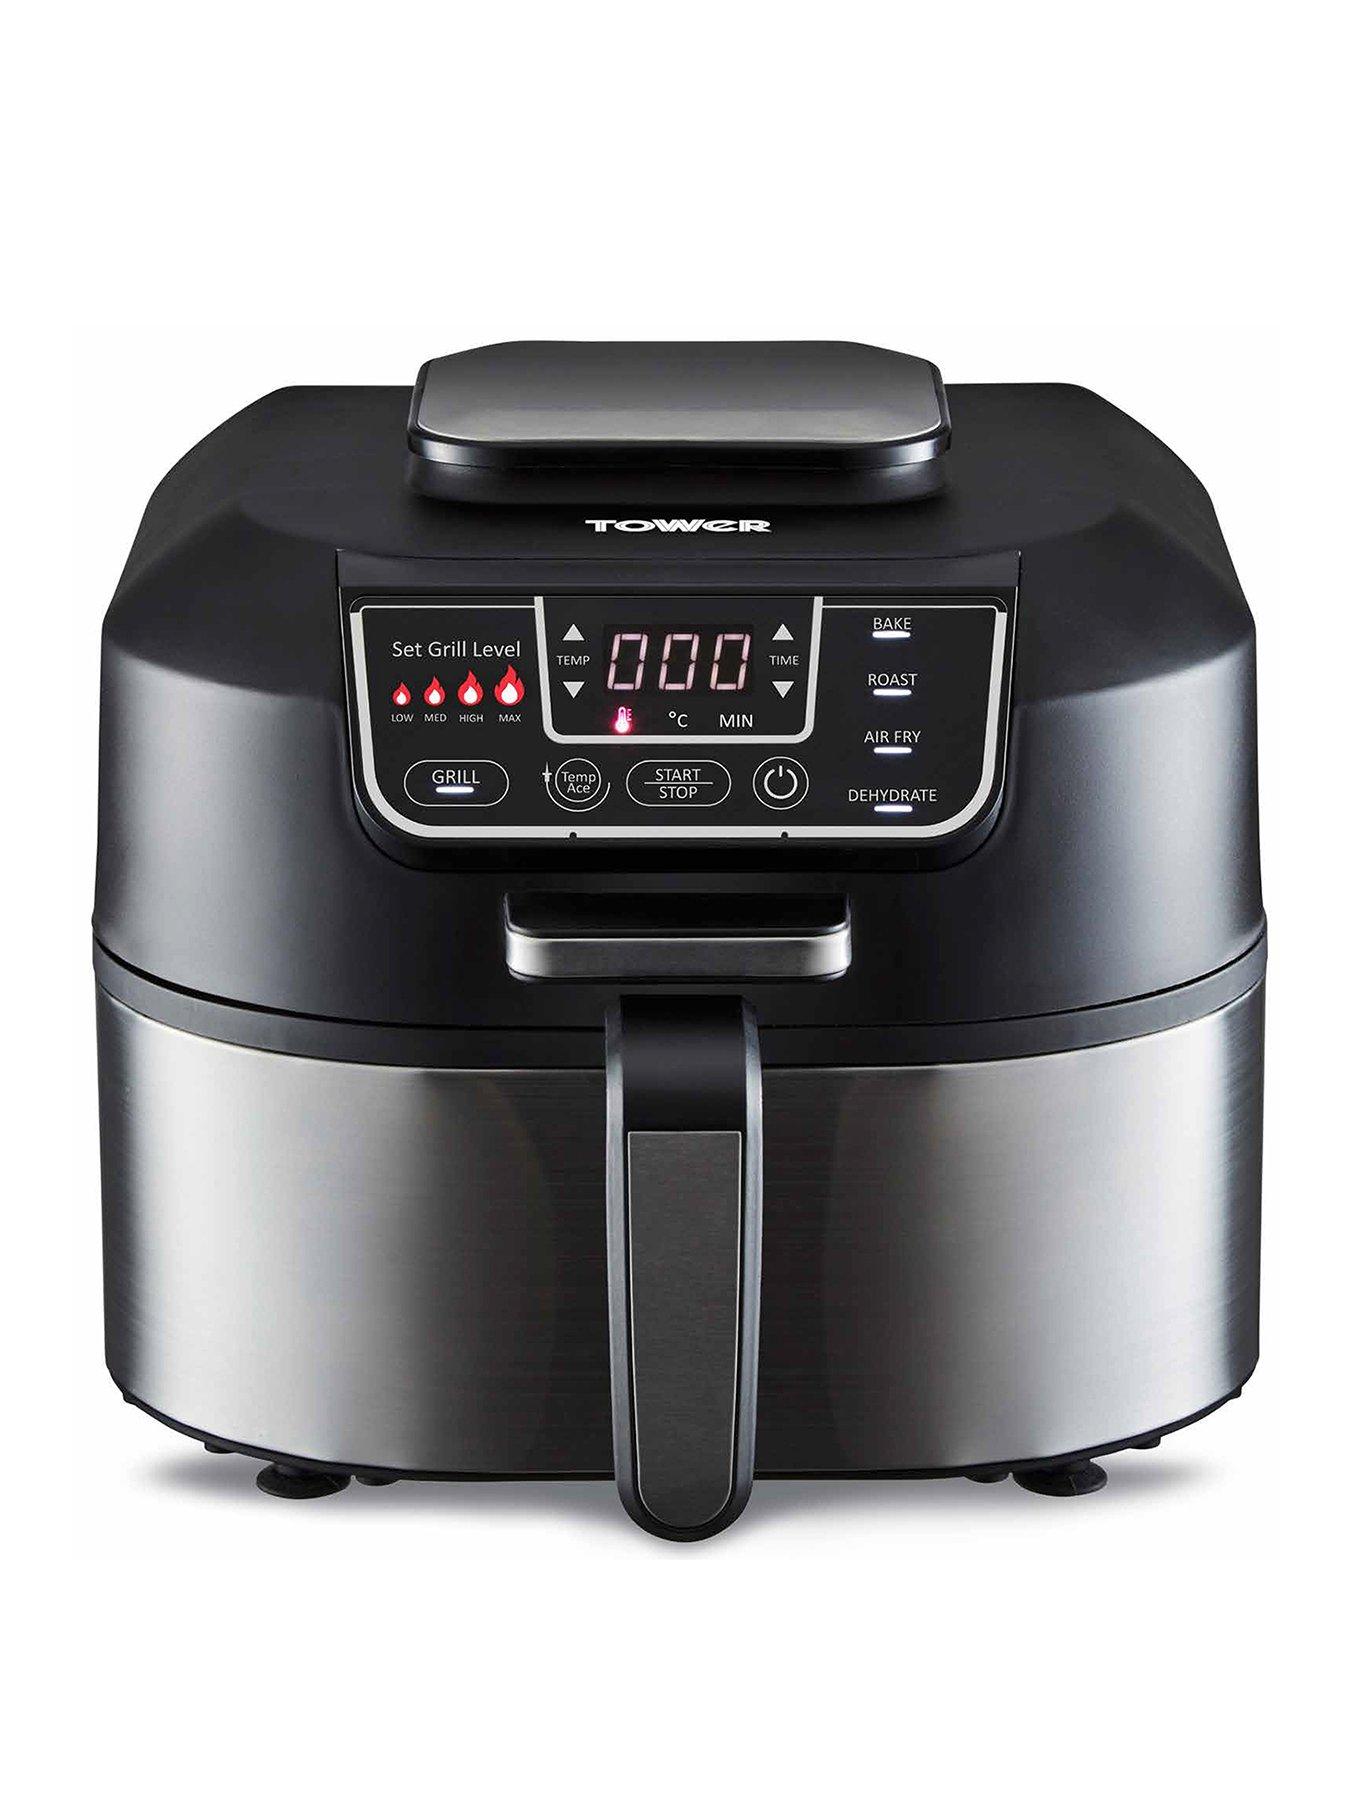 Tower T17086 Vortx 5 In 1 Air Fryer And Grill With Crisper, 5.6L, Black